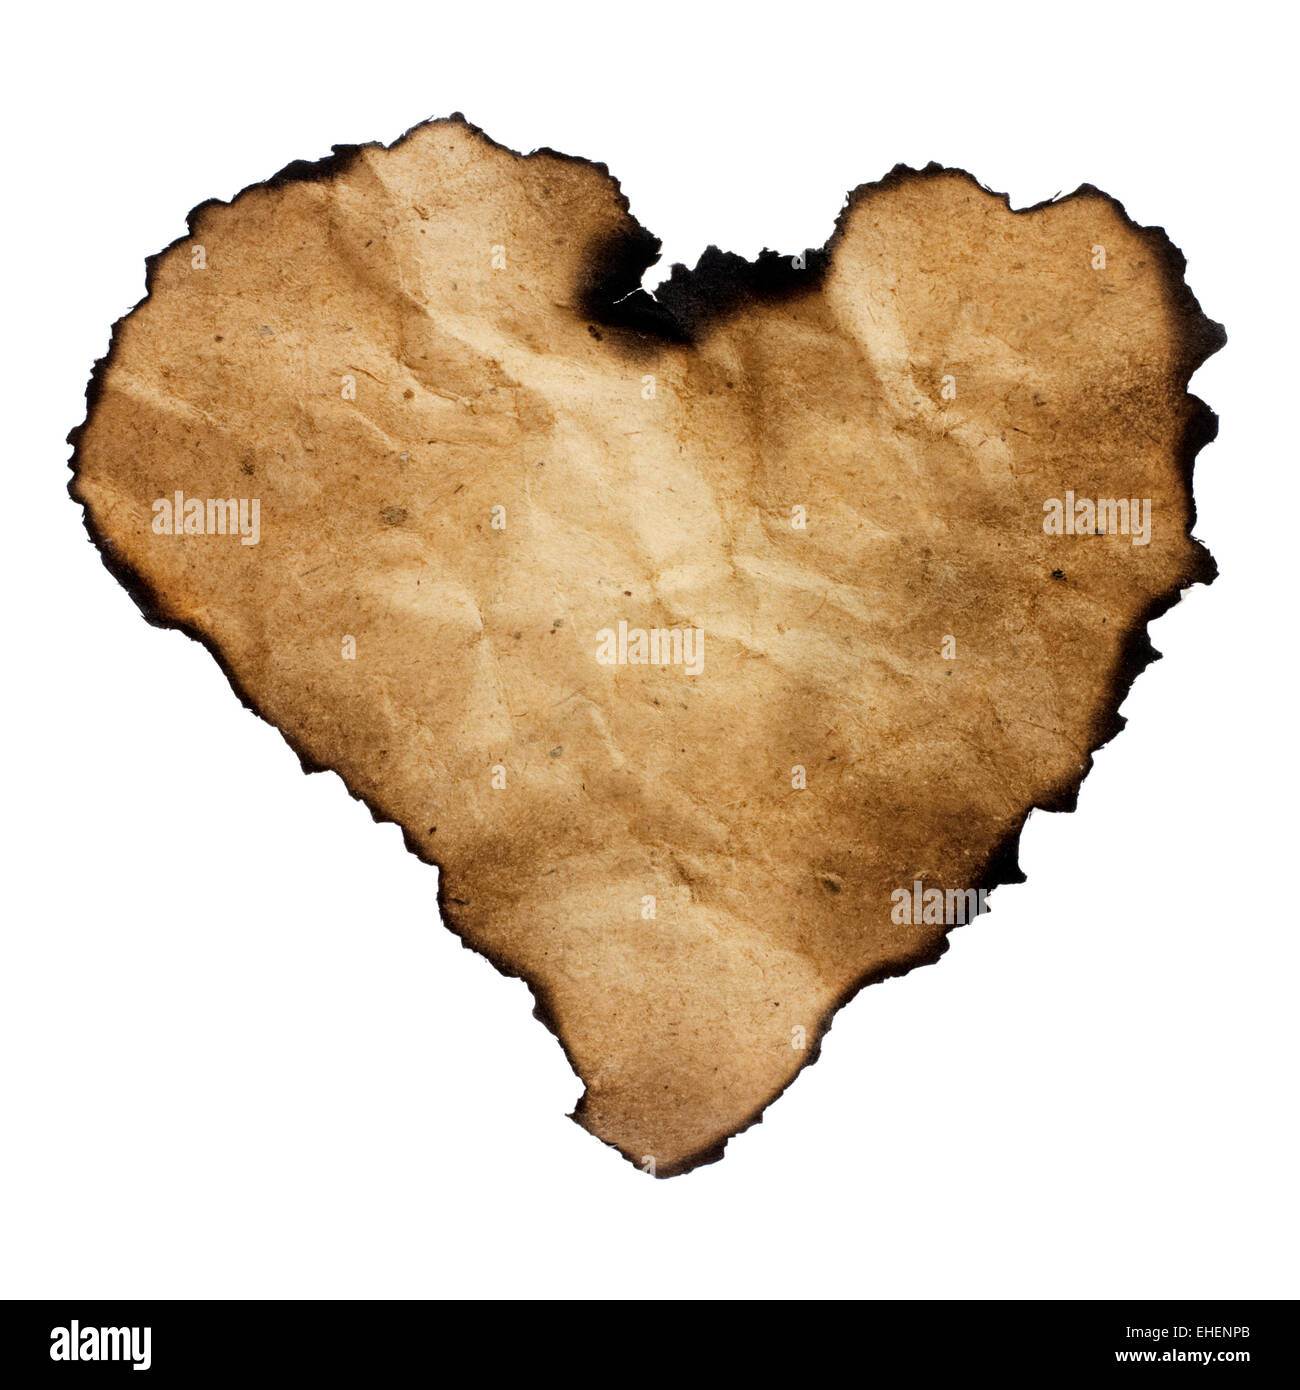 Burned heart-shaped paper isolated on white. Stock Photo